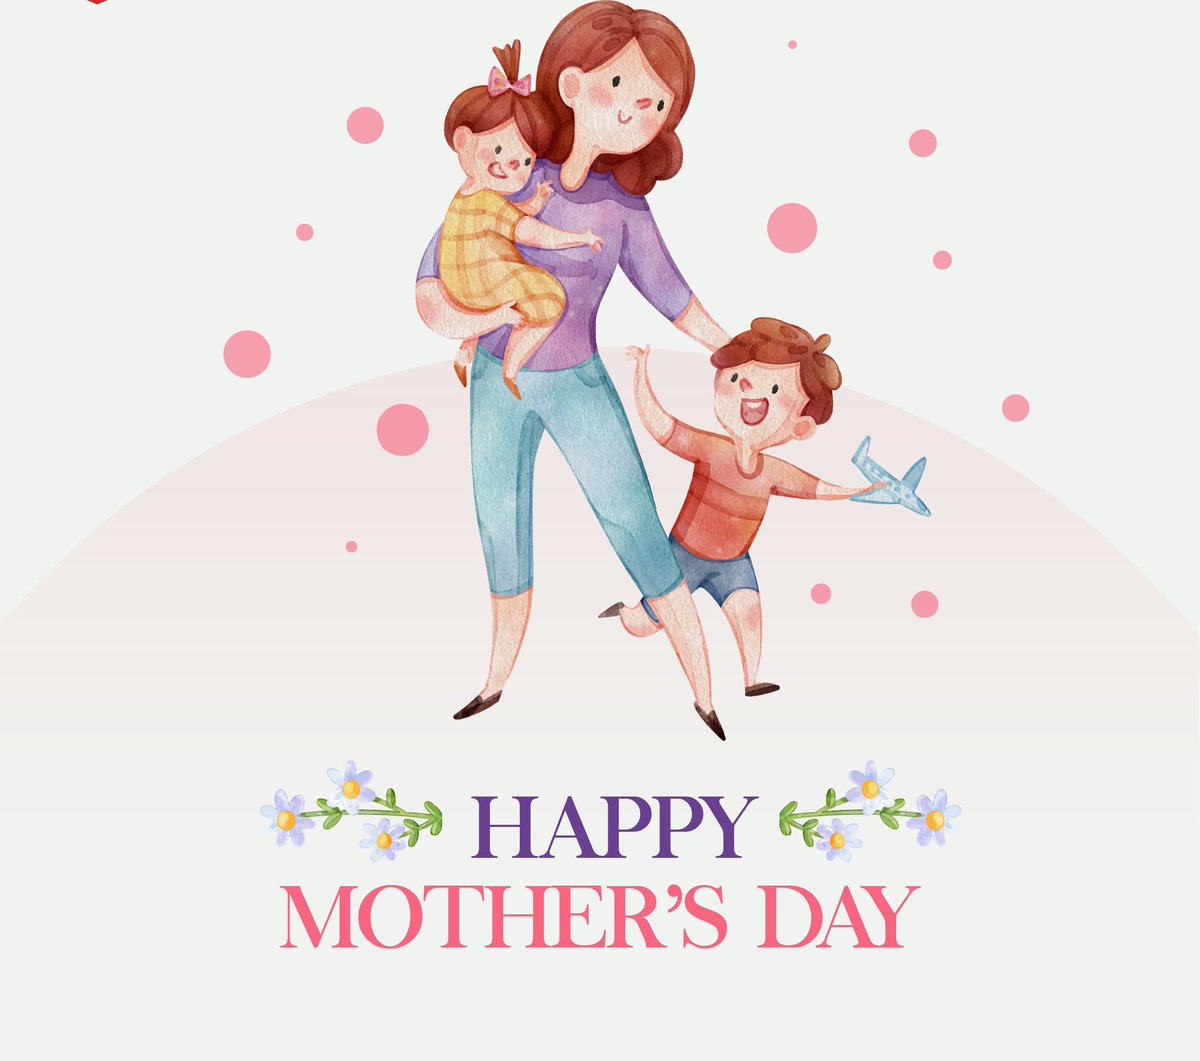 From cradle to cosmos, her love built your world. Now, it's your turn to craft hers with the unwavering promise of protection. Rockfort Entertainment celebrates Mother's Day, urging you to cocoon her in security and love. #MothersDay